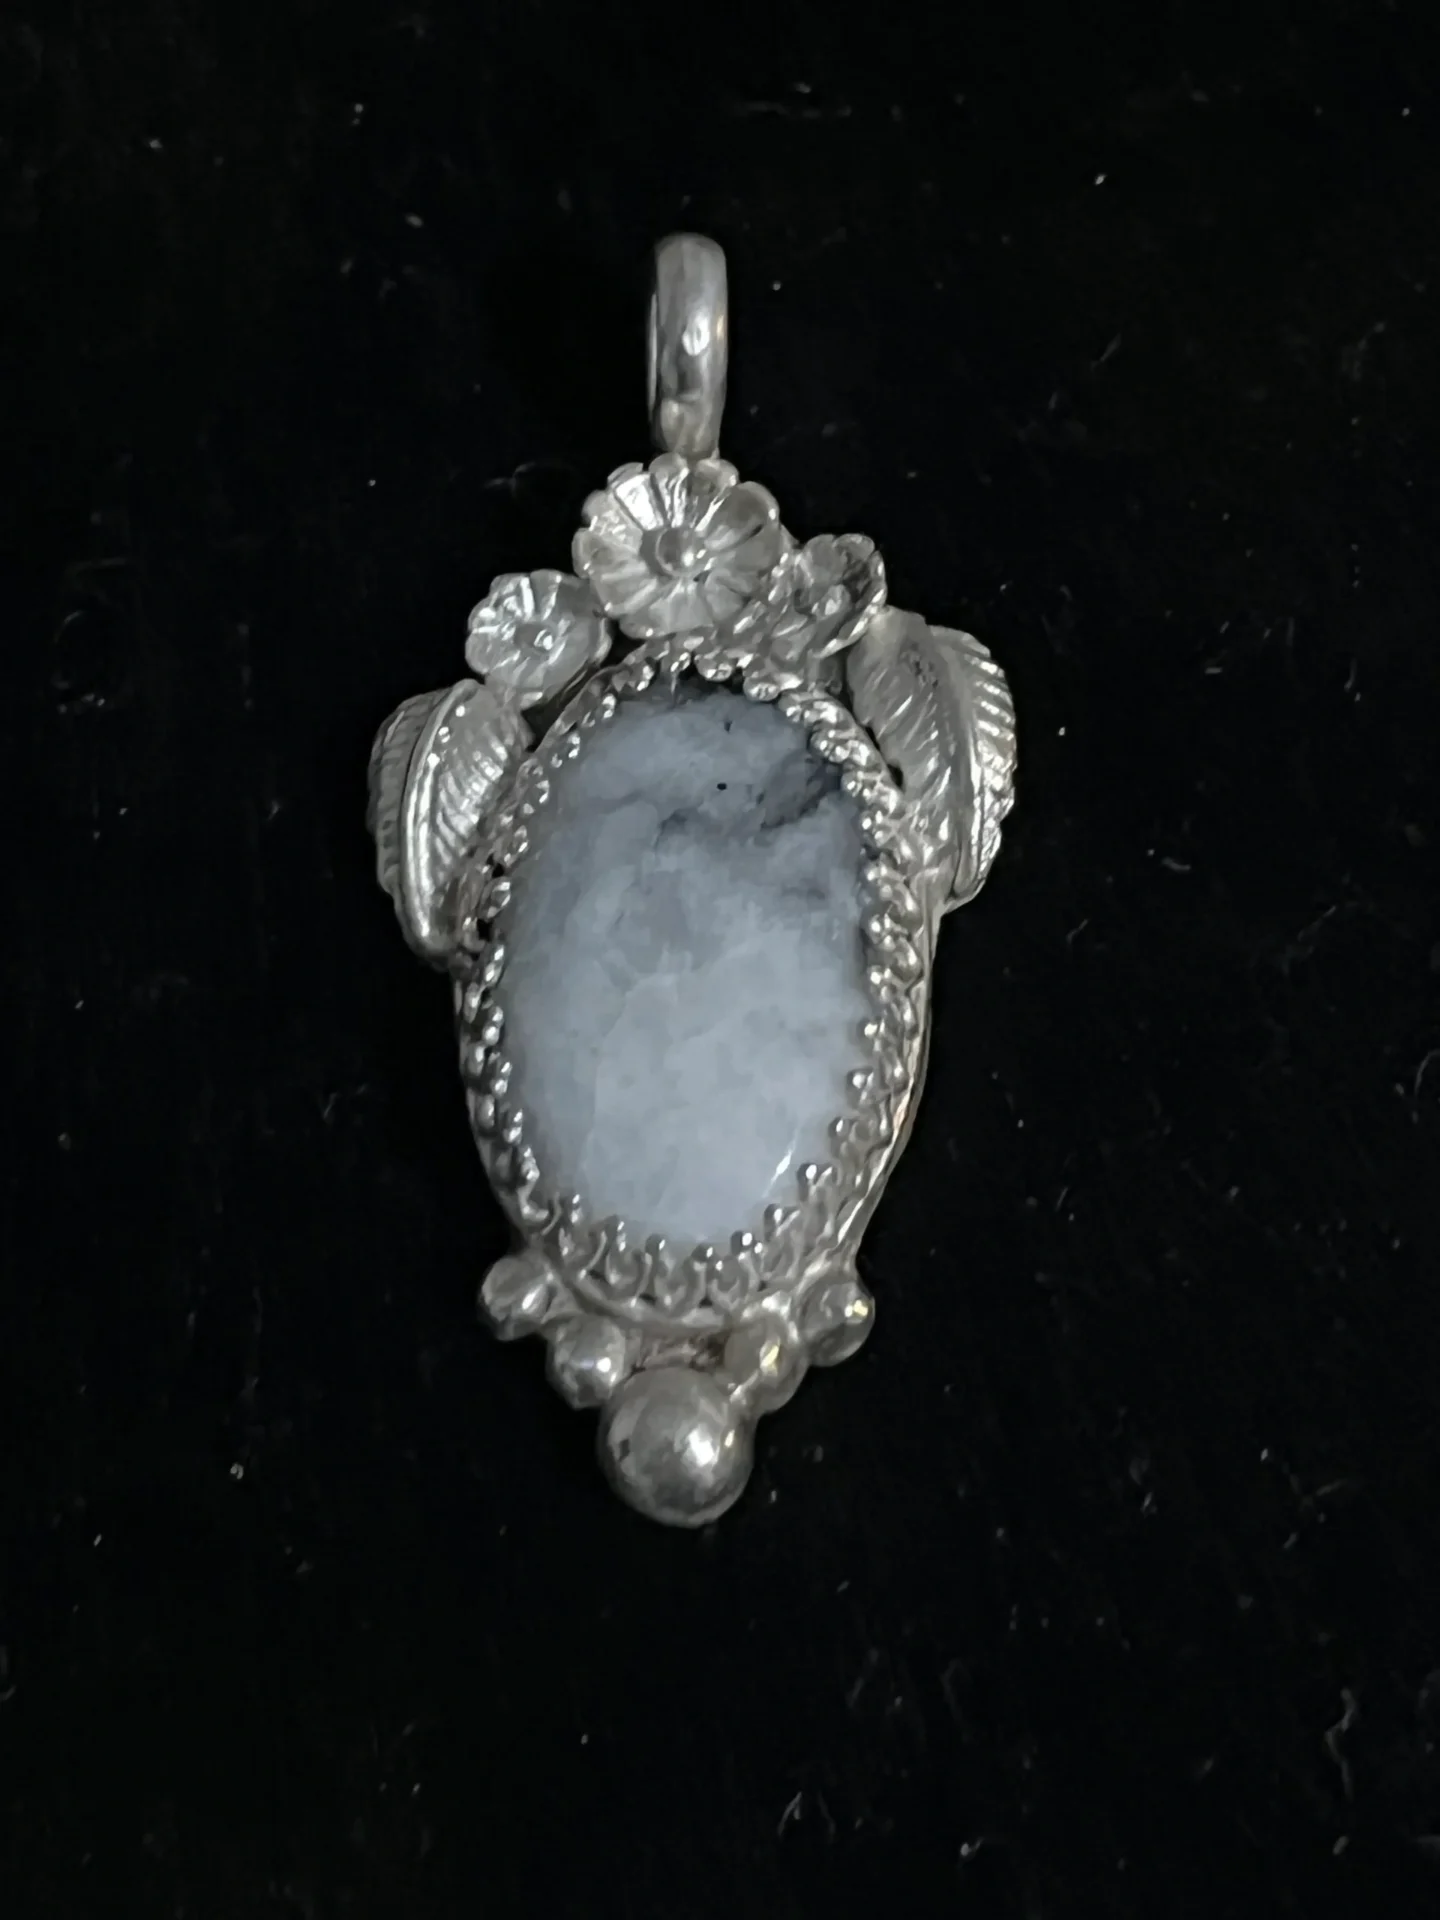 A silver pendant with a blue stone in the middle.